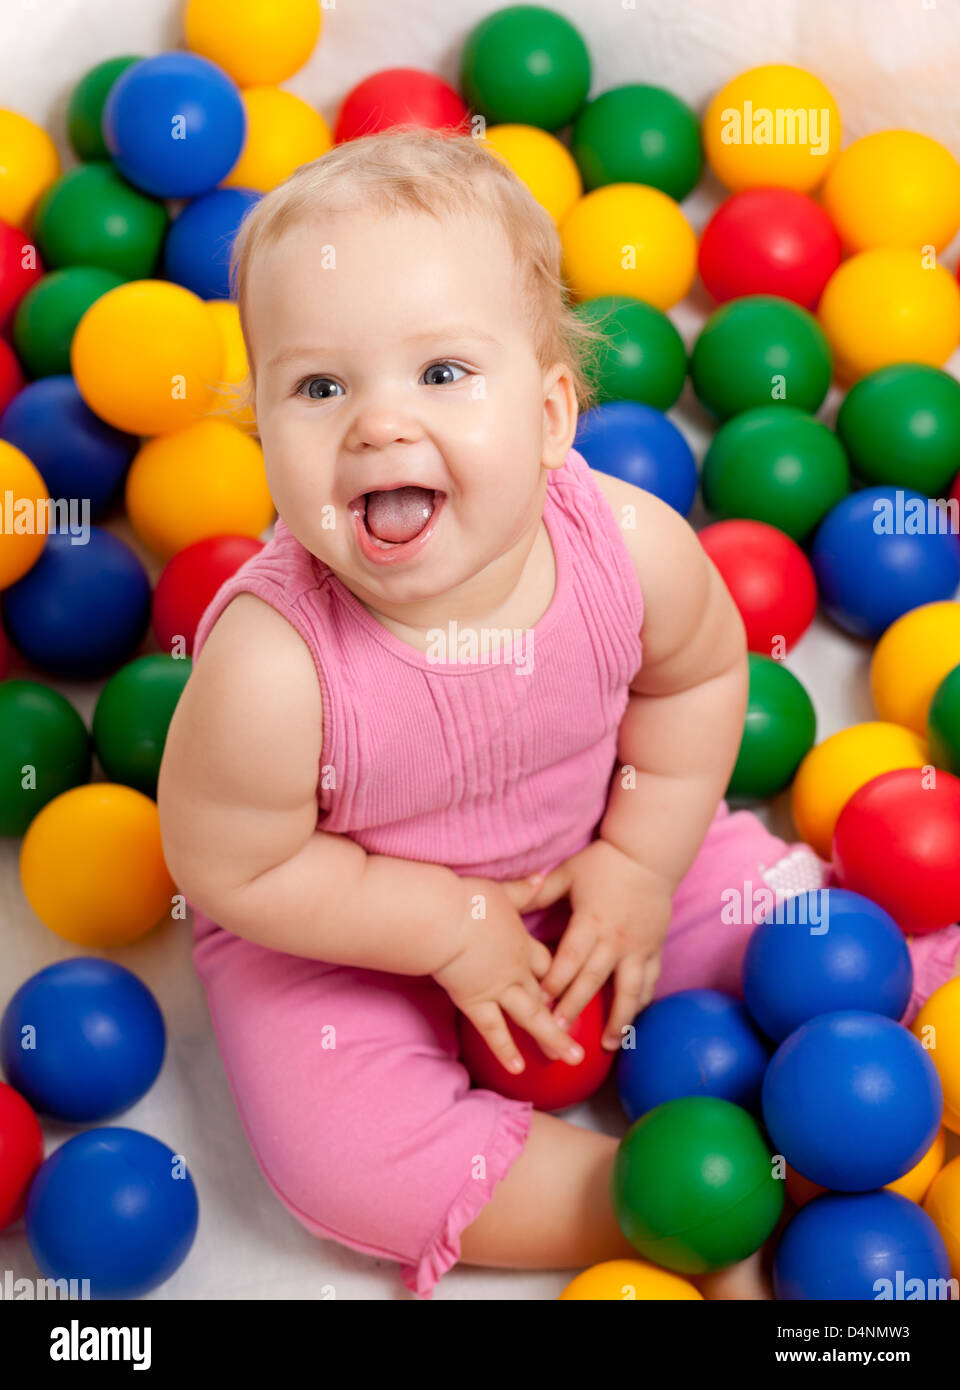 pretty baby with color educational toy Stock Photo